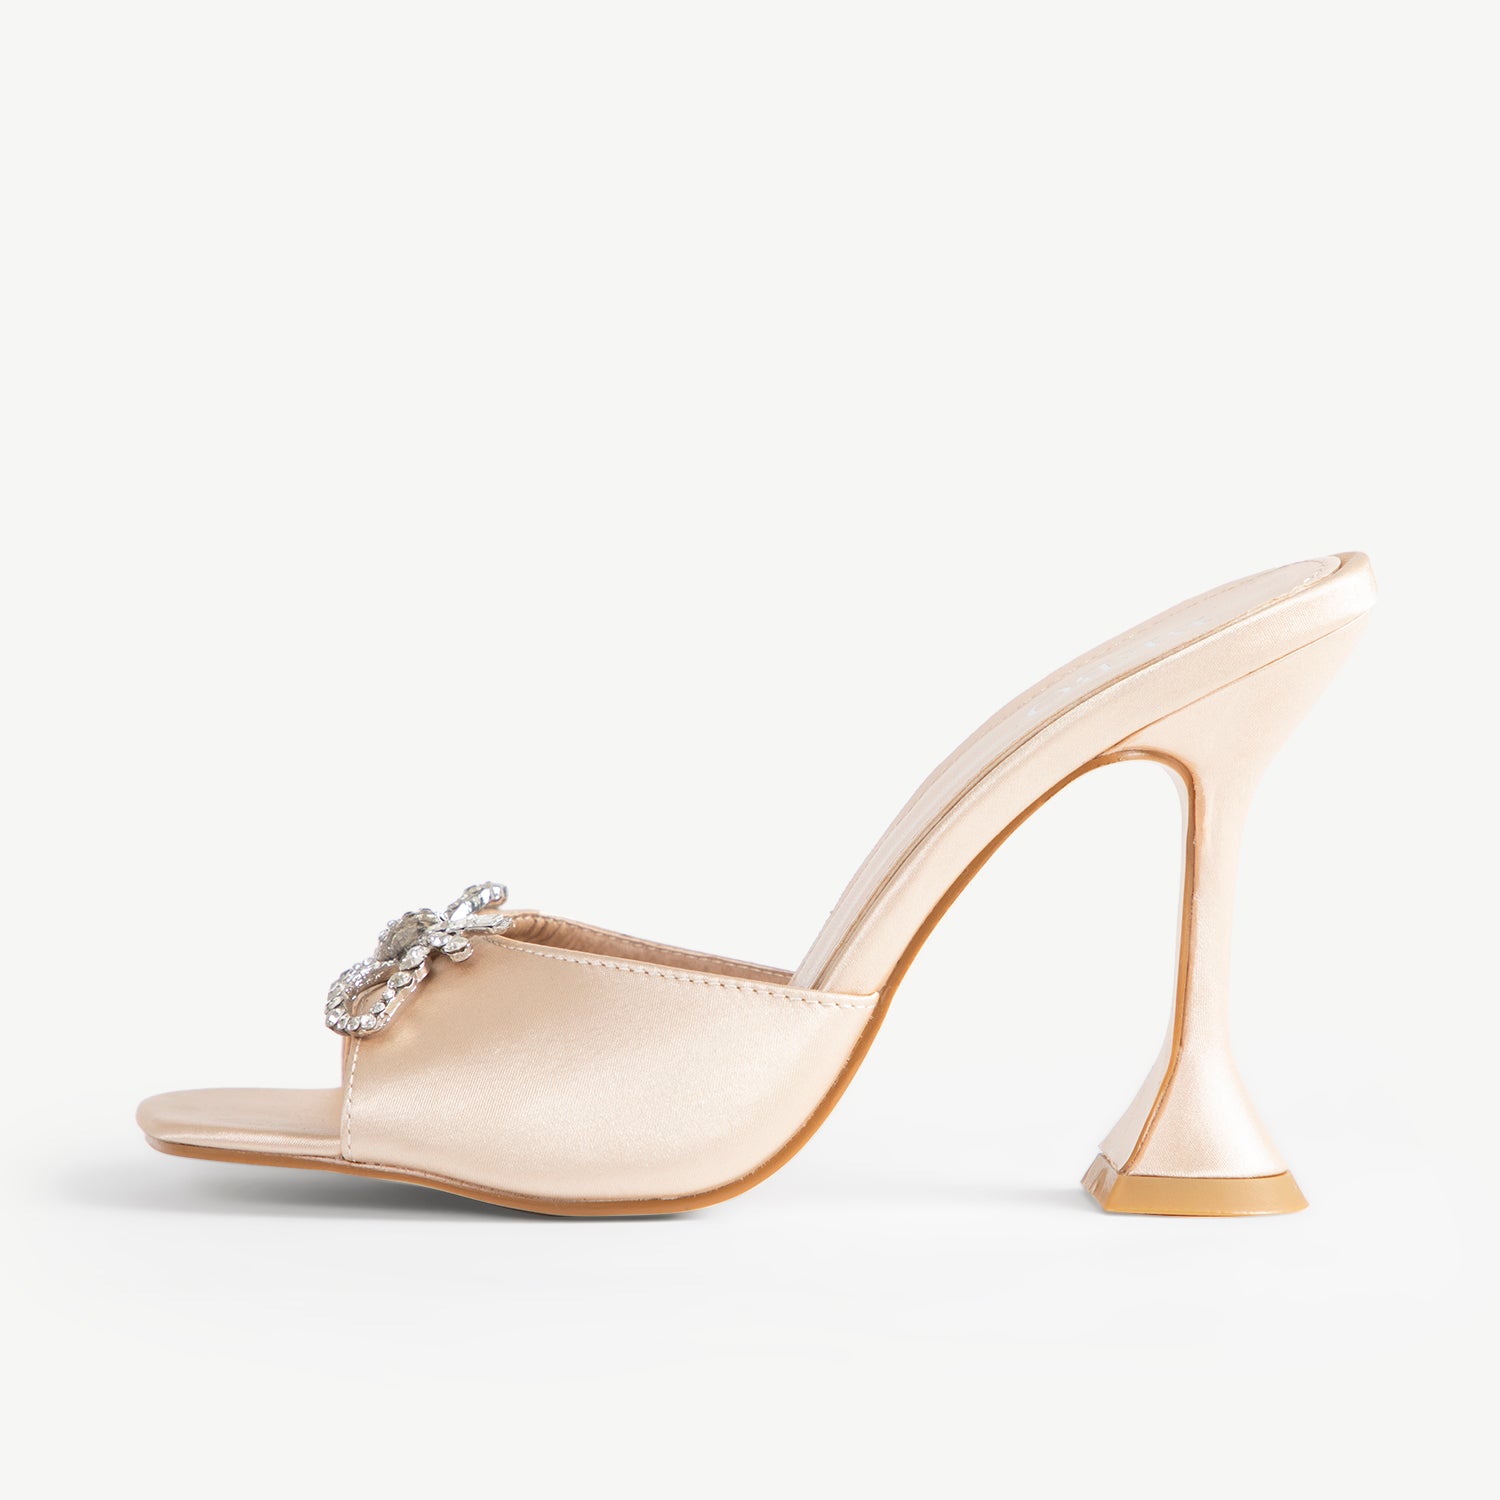 BEBO Rizzle Heeled Mule in Champagne